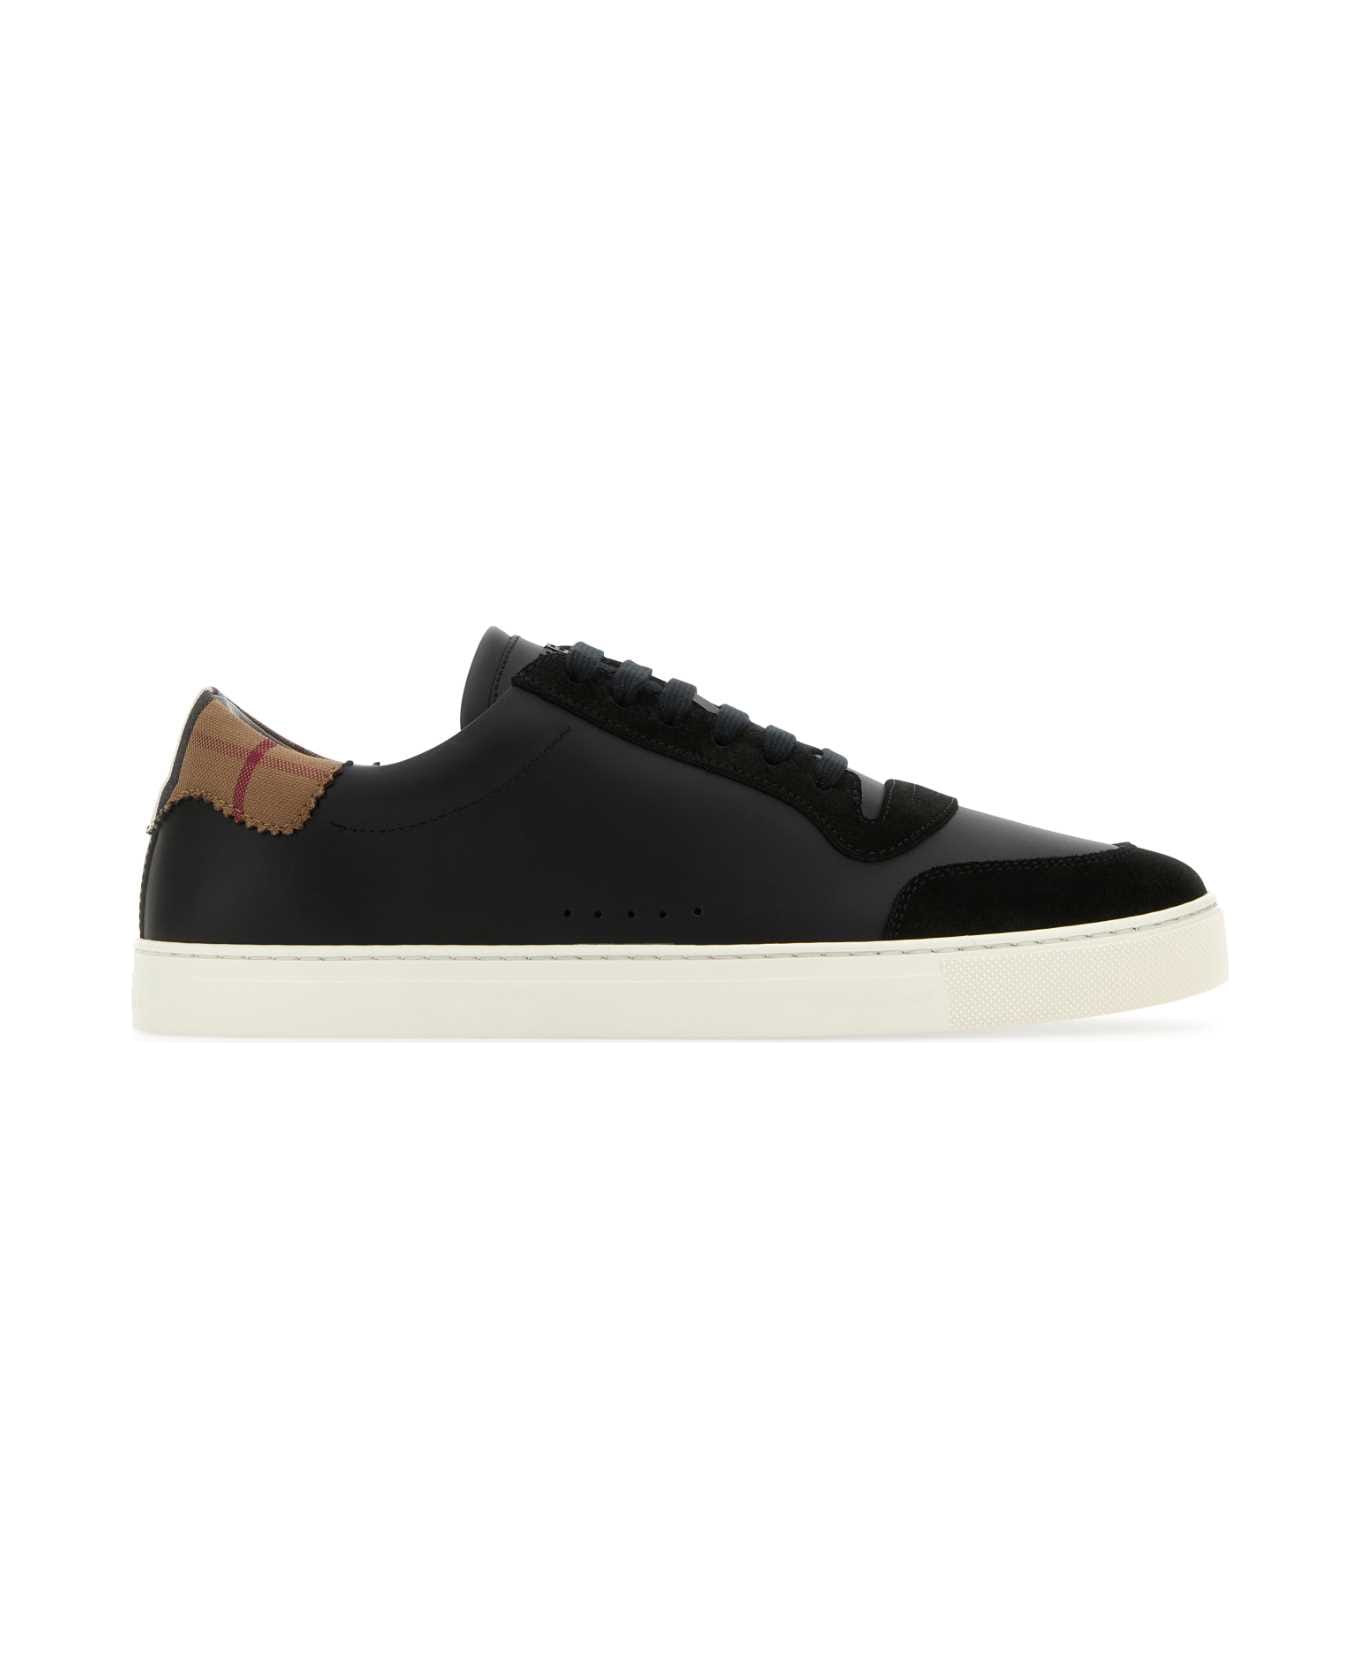 Burberry Black Leather Sneakers - BLACK